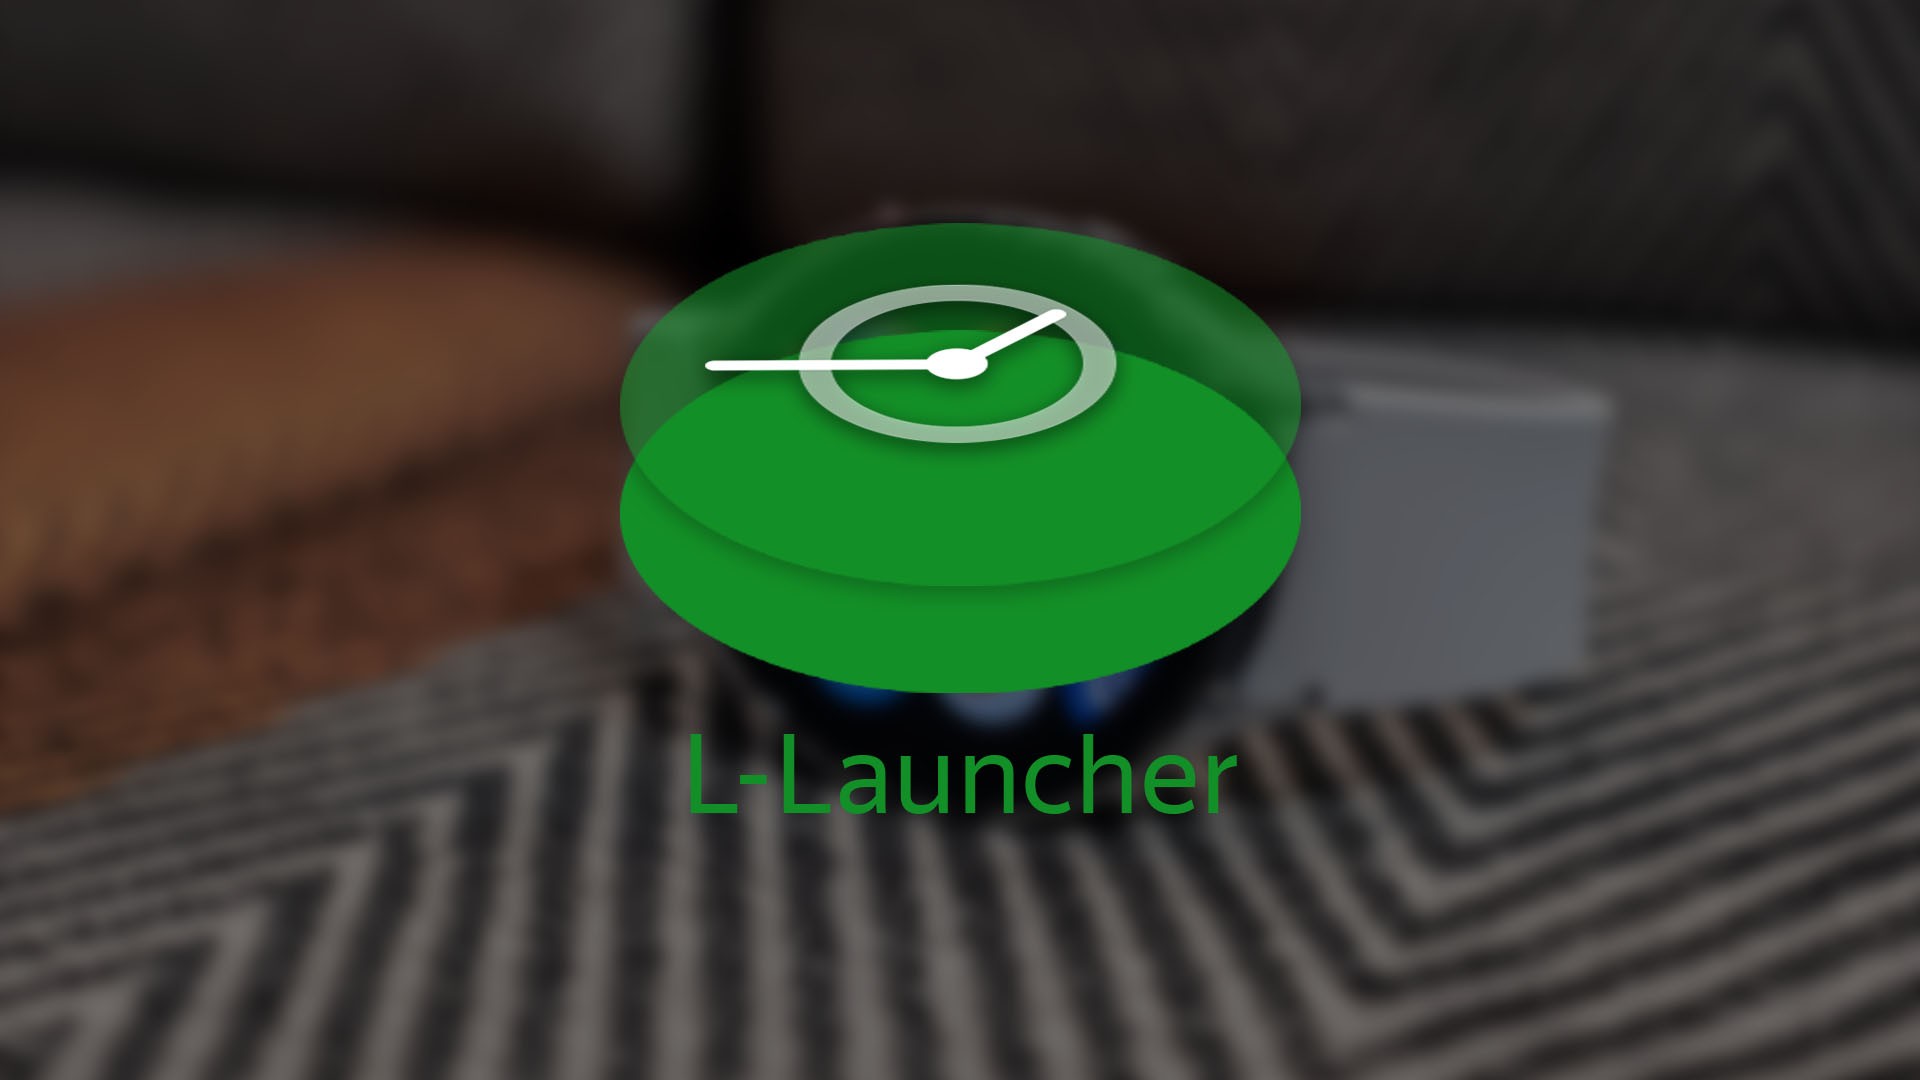 Free L-Launcher brings Wear OS-like interface to Android smartwatches